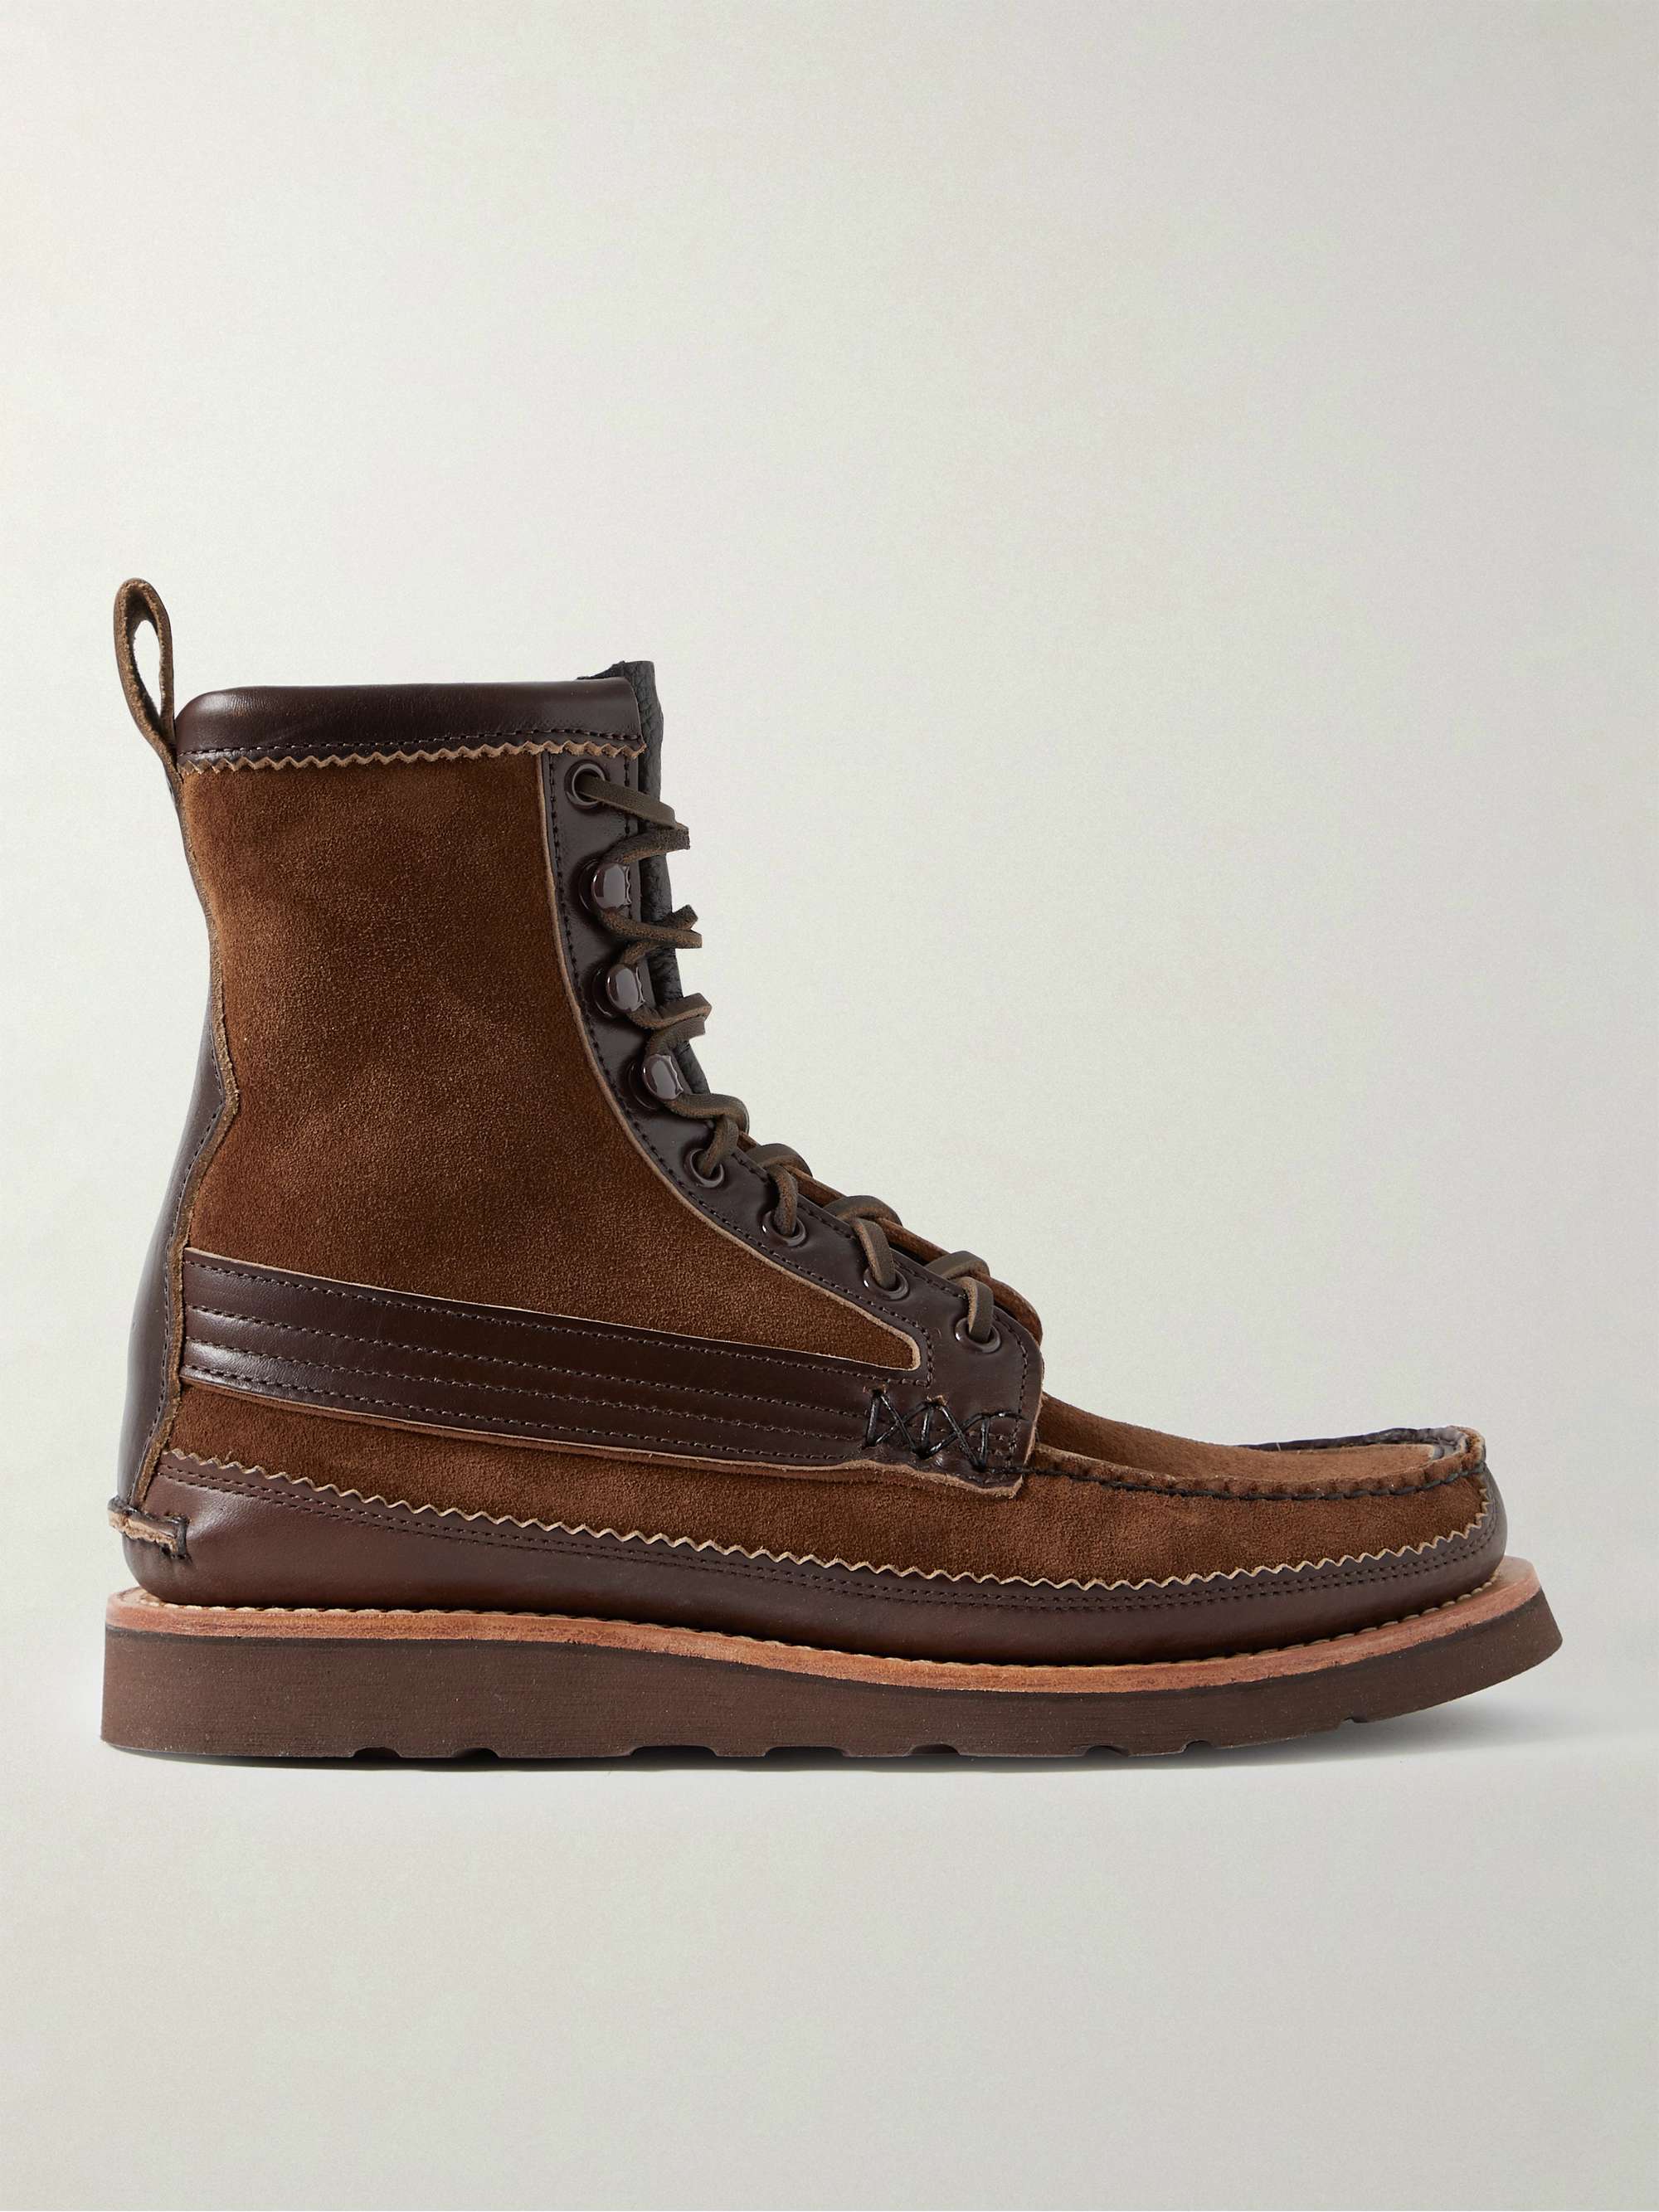 YUKETEN Maine Guide DB Leather Boots